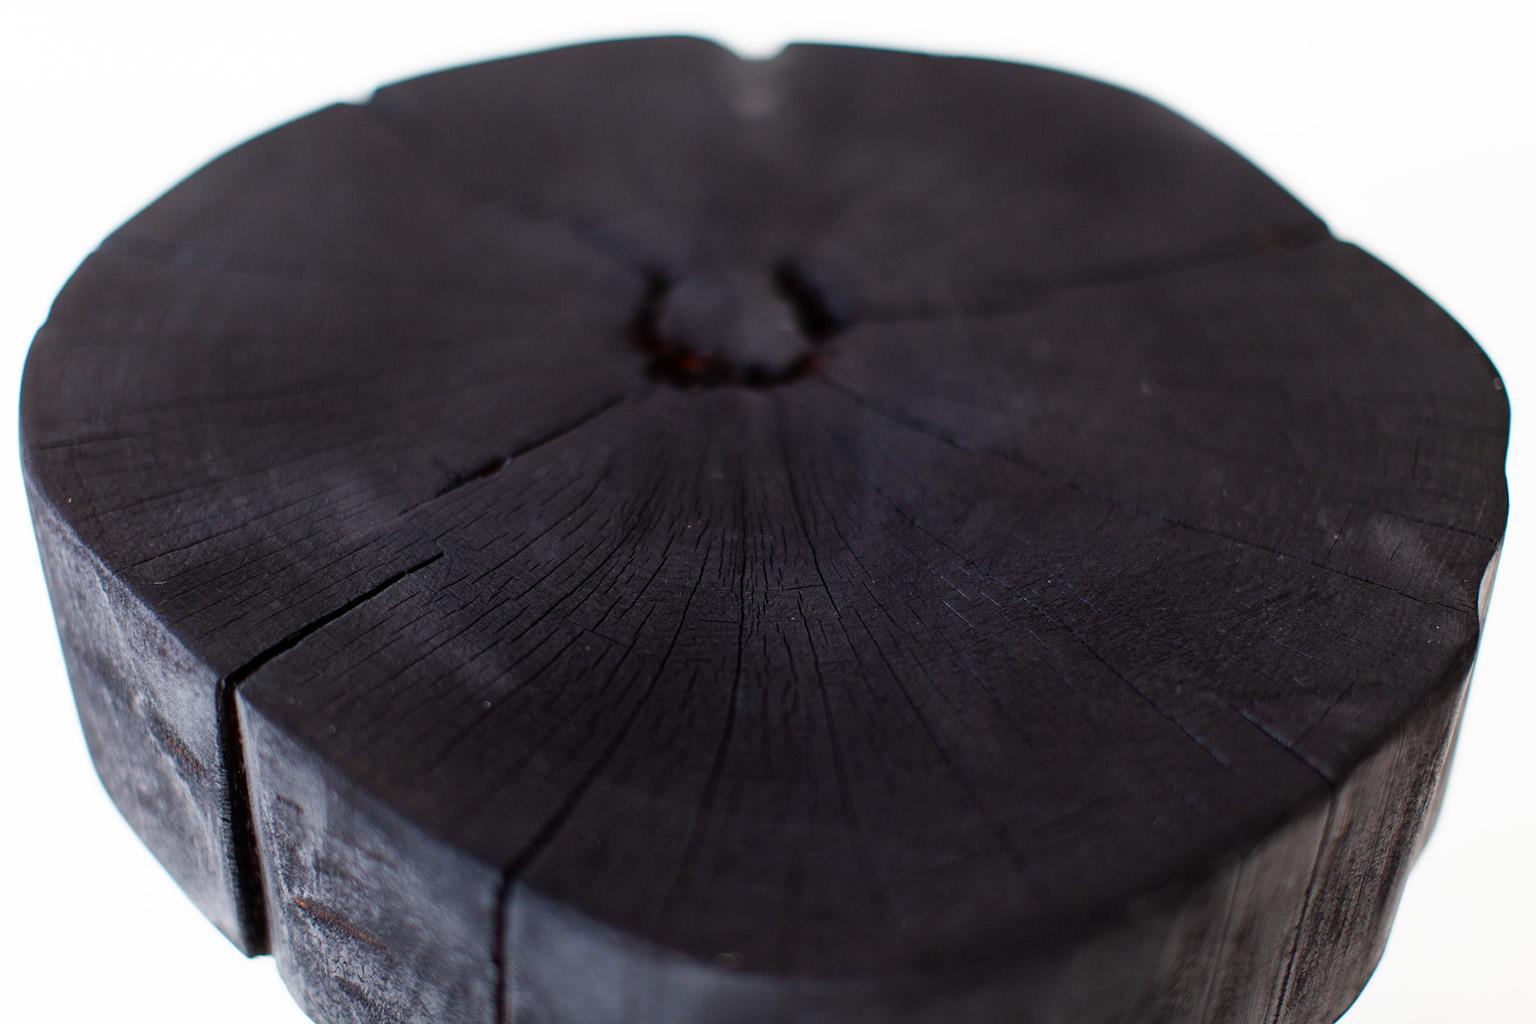 Please scroll down to read IMPORTANT INSTRUCTIONS ABOUT OUR STUMPS before purchase!

Originating in 18th century Japan, shou sugi ban is a particularly striking method of preserving wood by charring it with fire. Traditionally, this practice is used